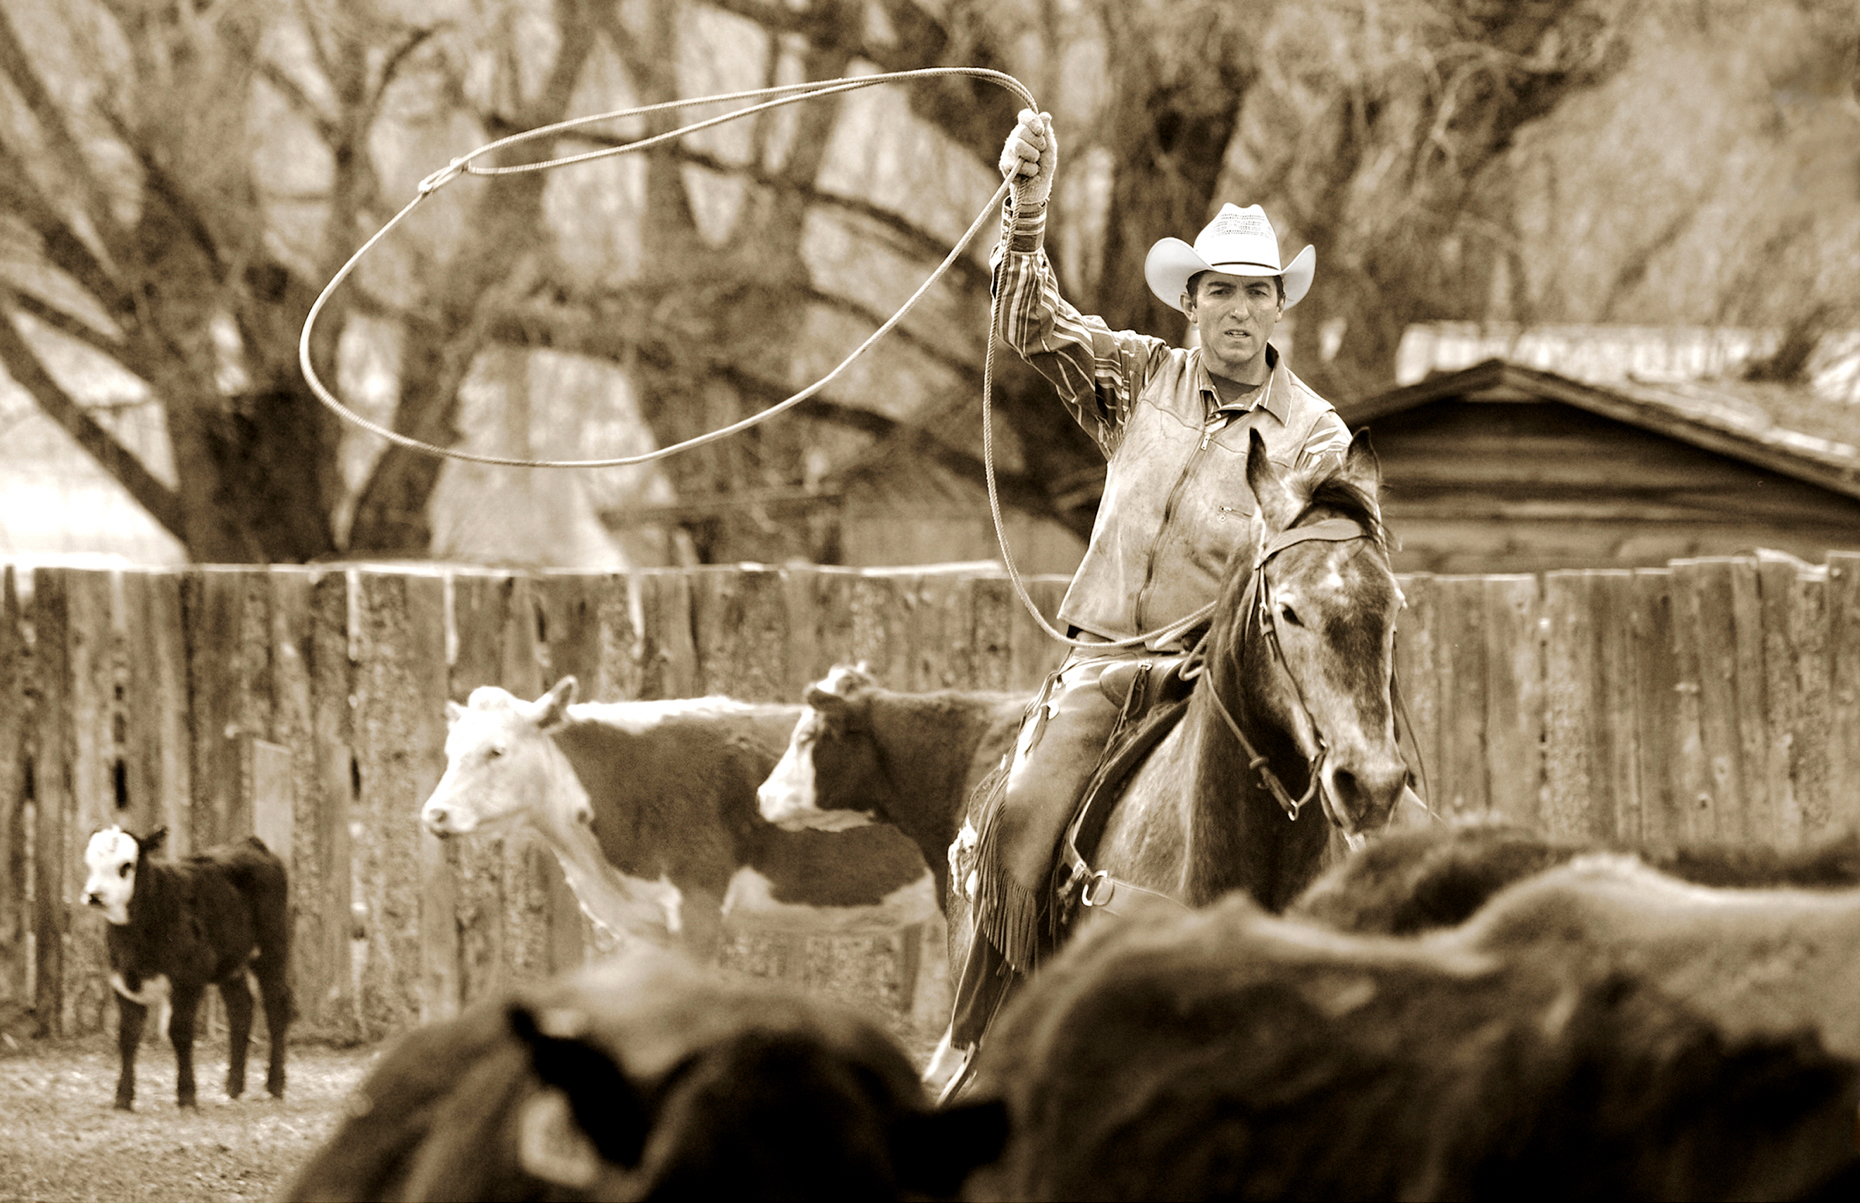 Black & white view of cowboy on horseback lassoing a cow during spring branding on the Everett Ranch near Salida, Colorado, USA